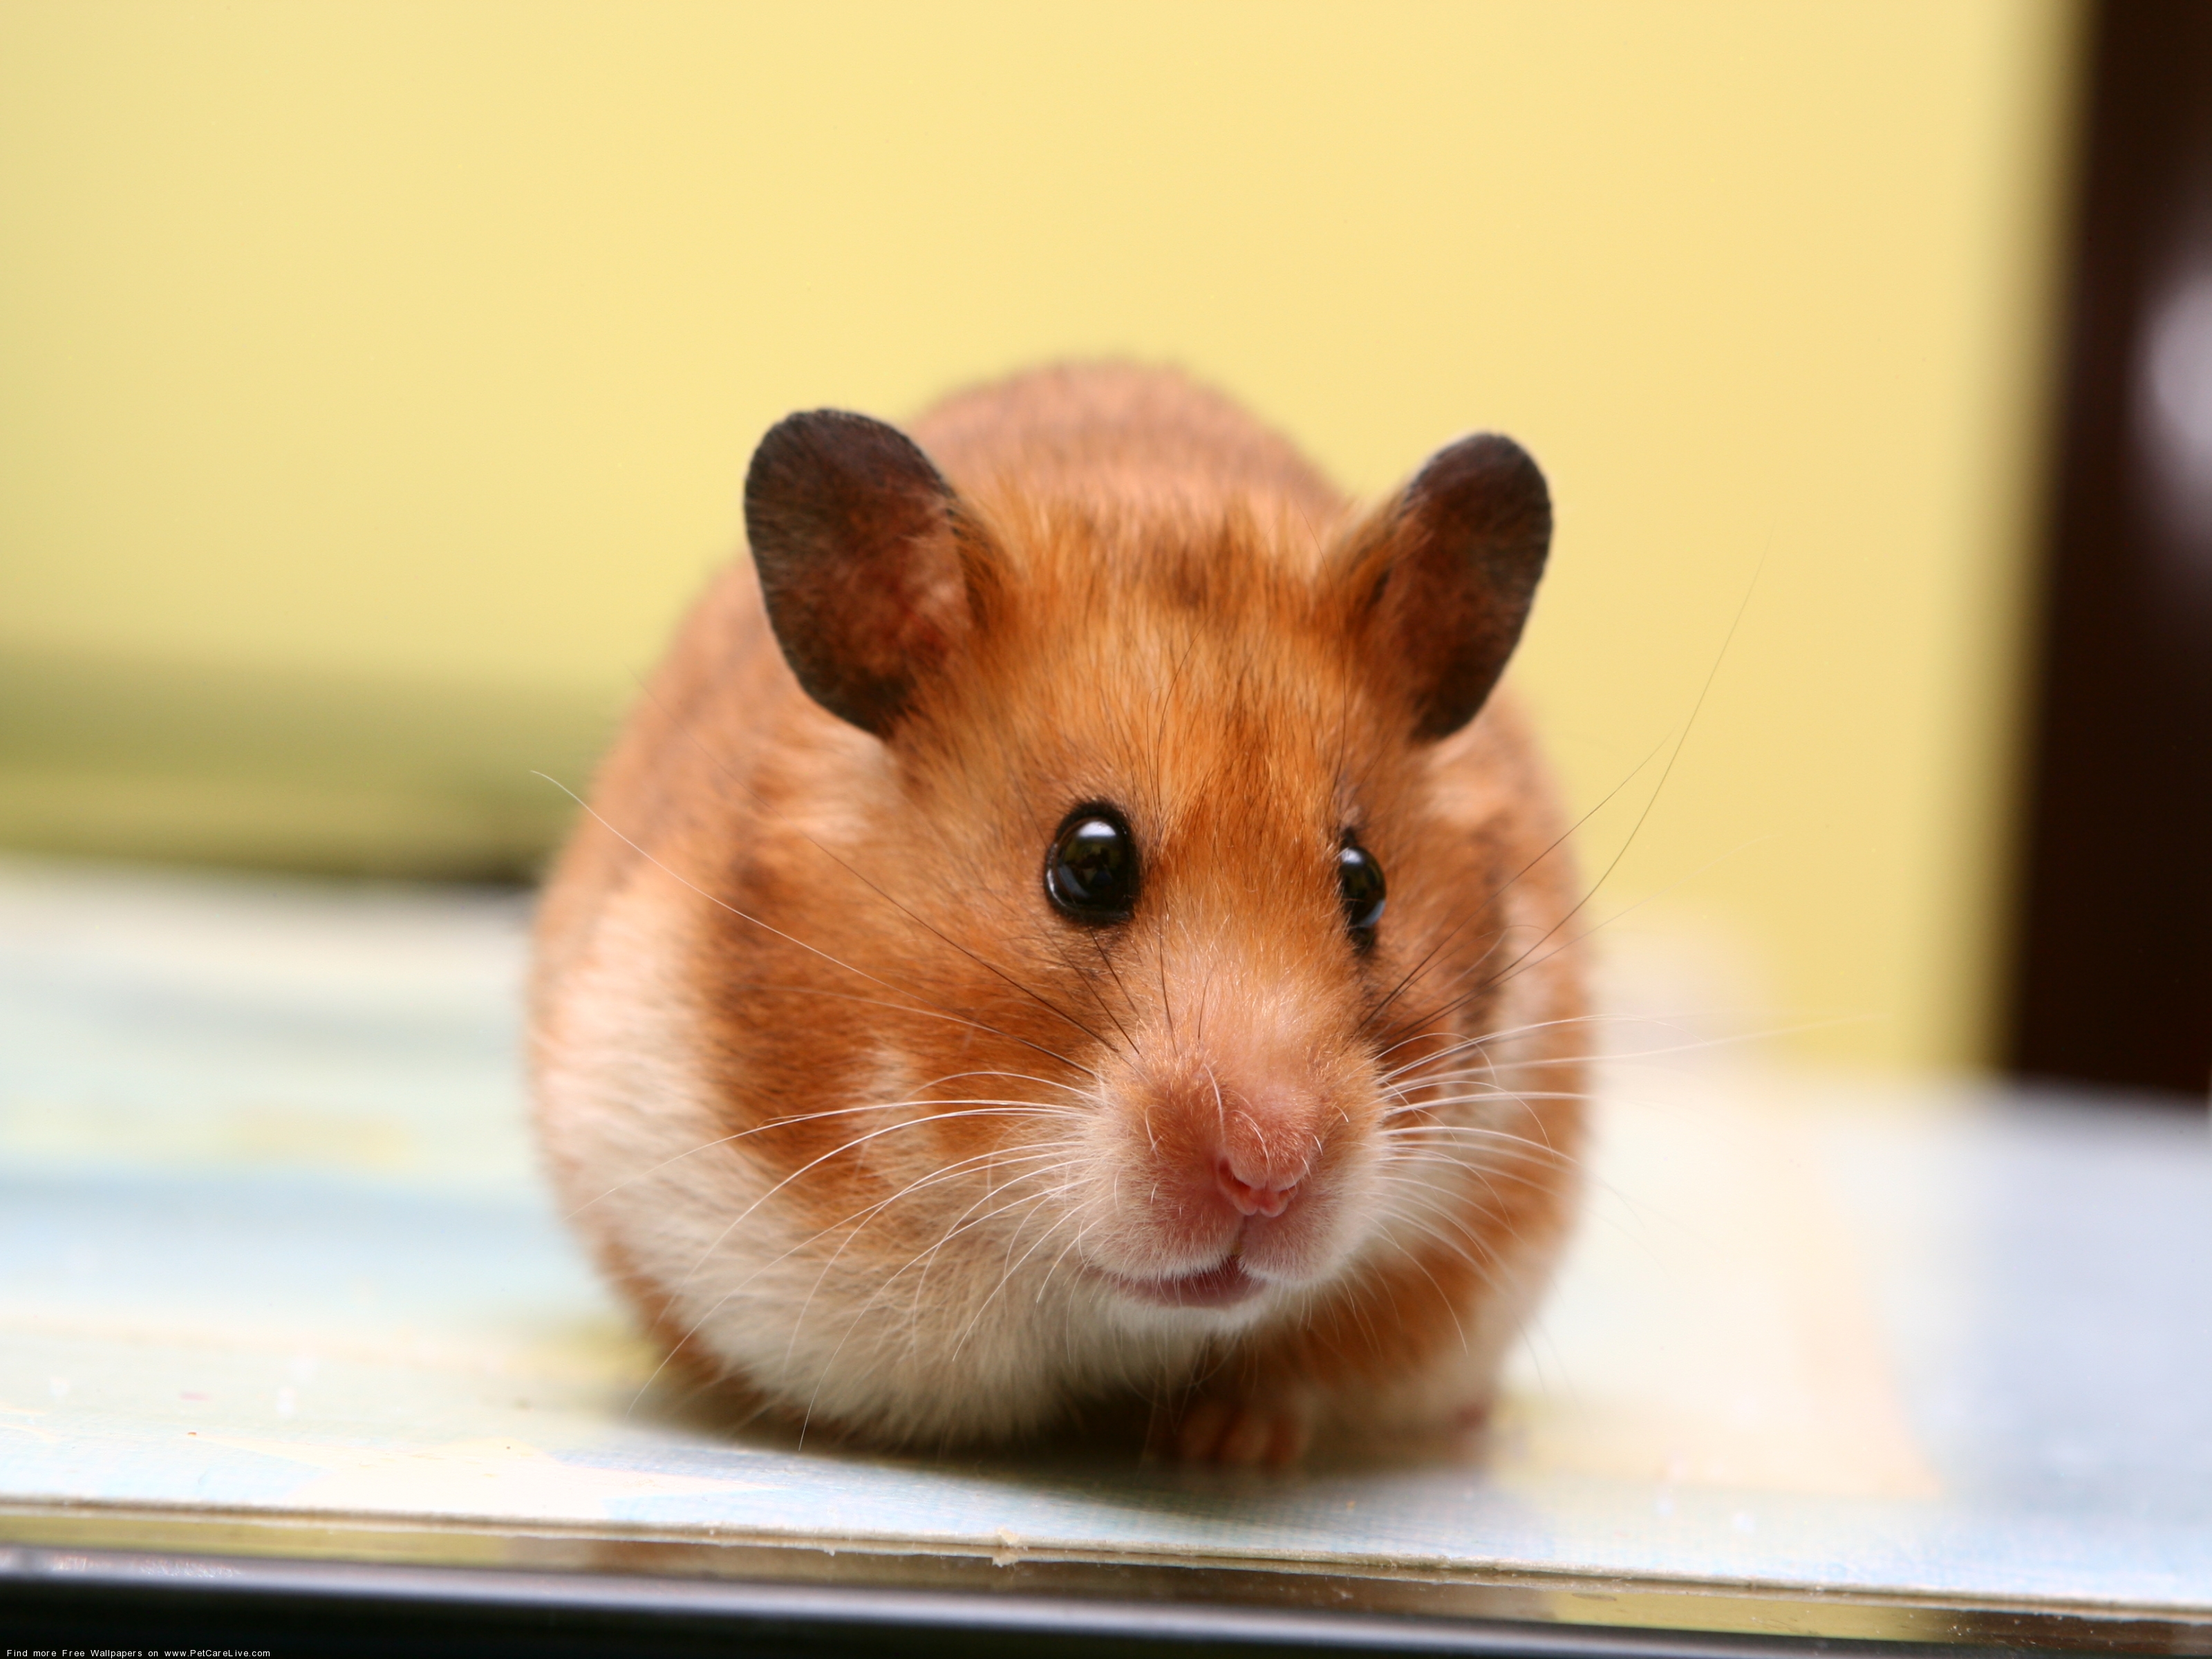 The Hamster Puter Wallpaper Pictures For Pc